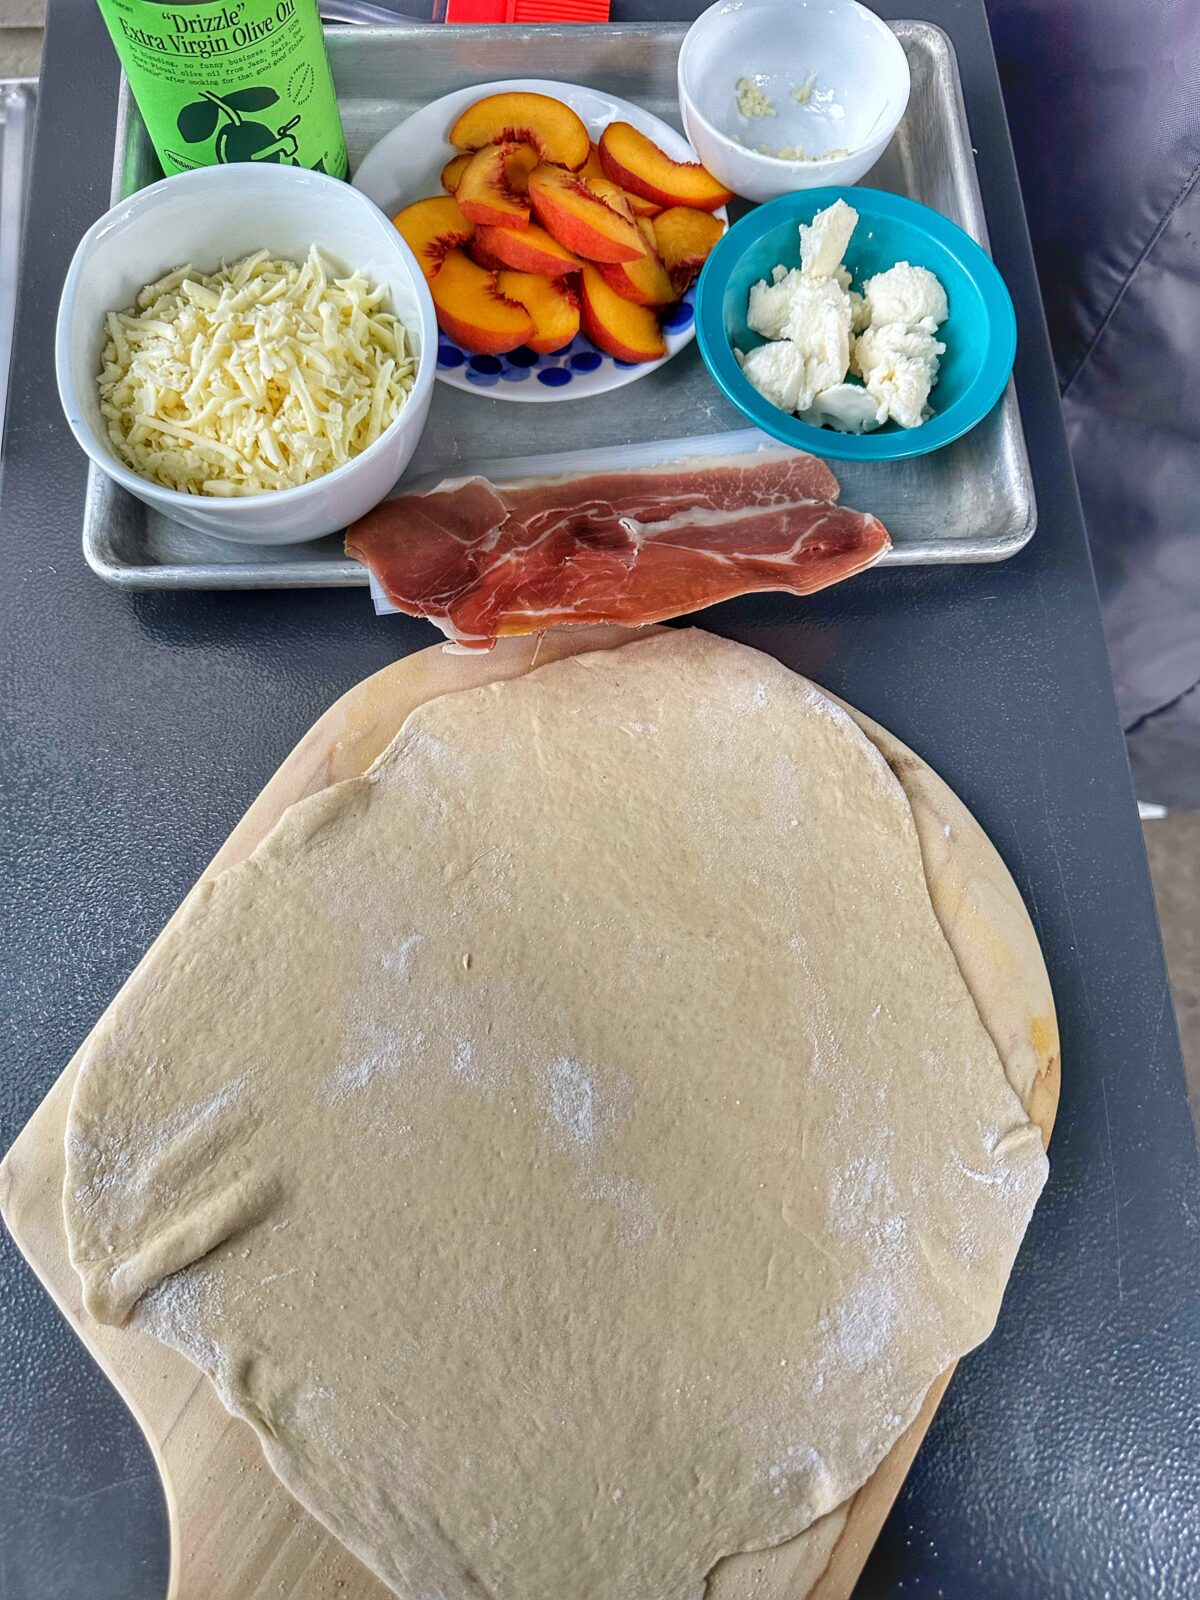 Ingredients for Serrano ham and peach pizza on a tray with a stretched pizza dough.